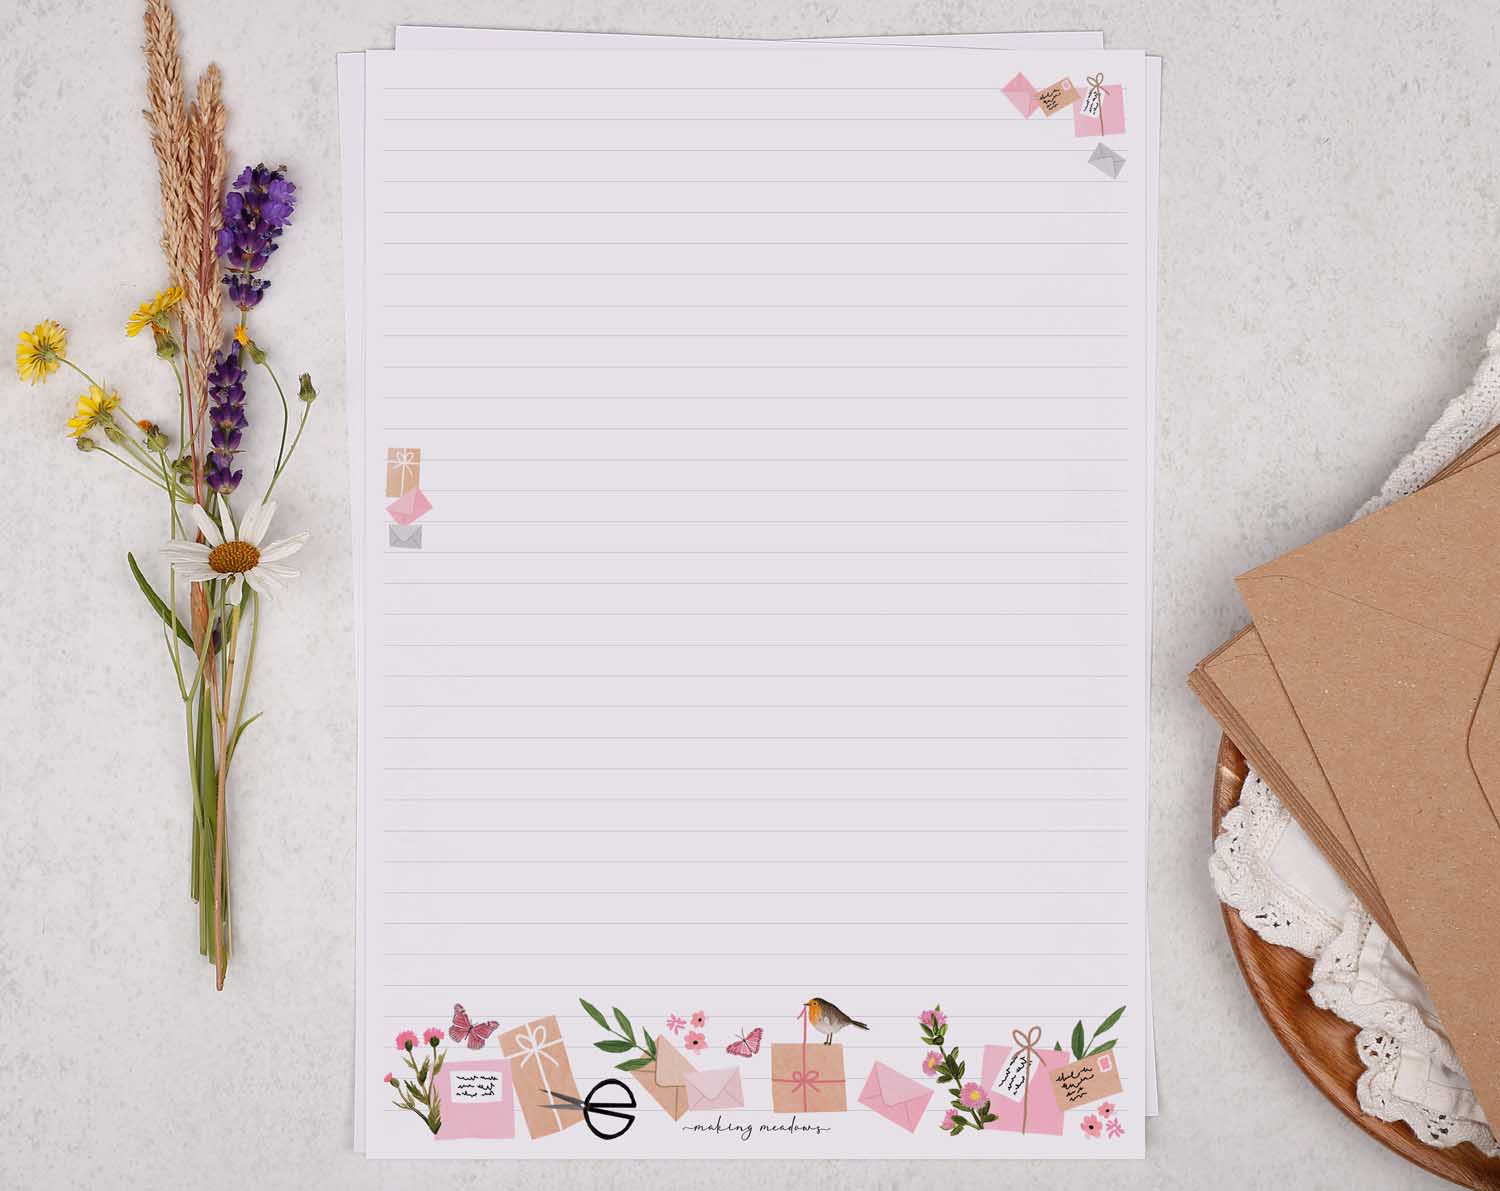 A4 letter writing paper sheets with a pink floral post border around the letter paper in a delicate flower pattern. 